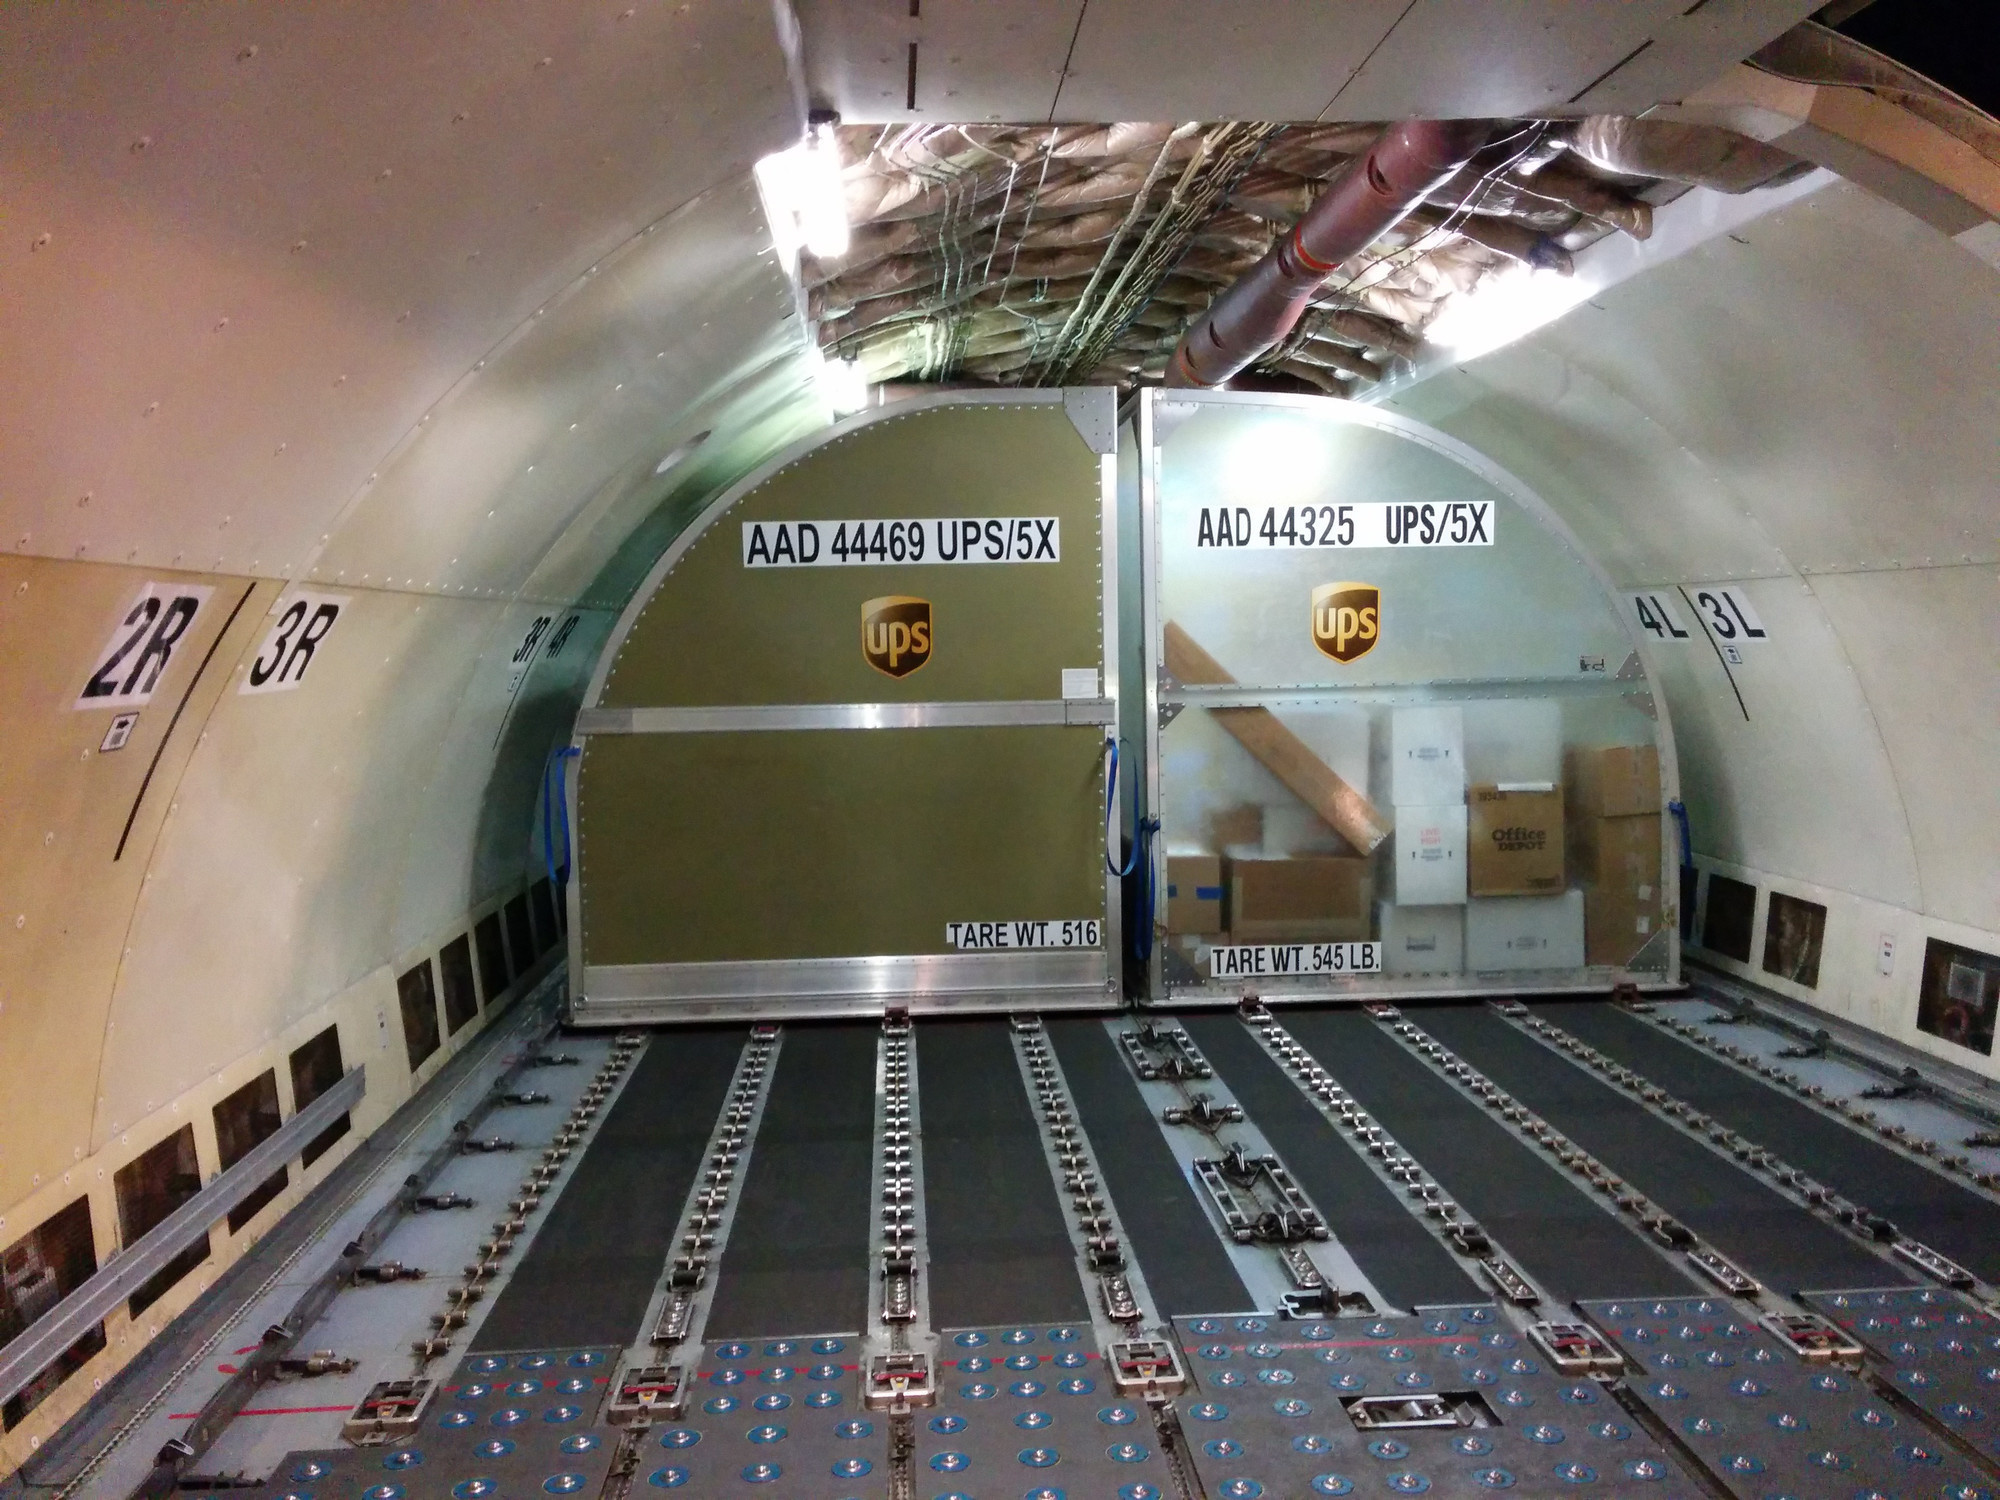 The centre of a Boeing A300 UPS cargo plane.